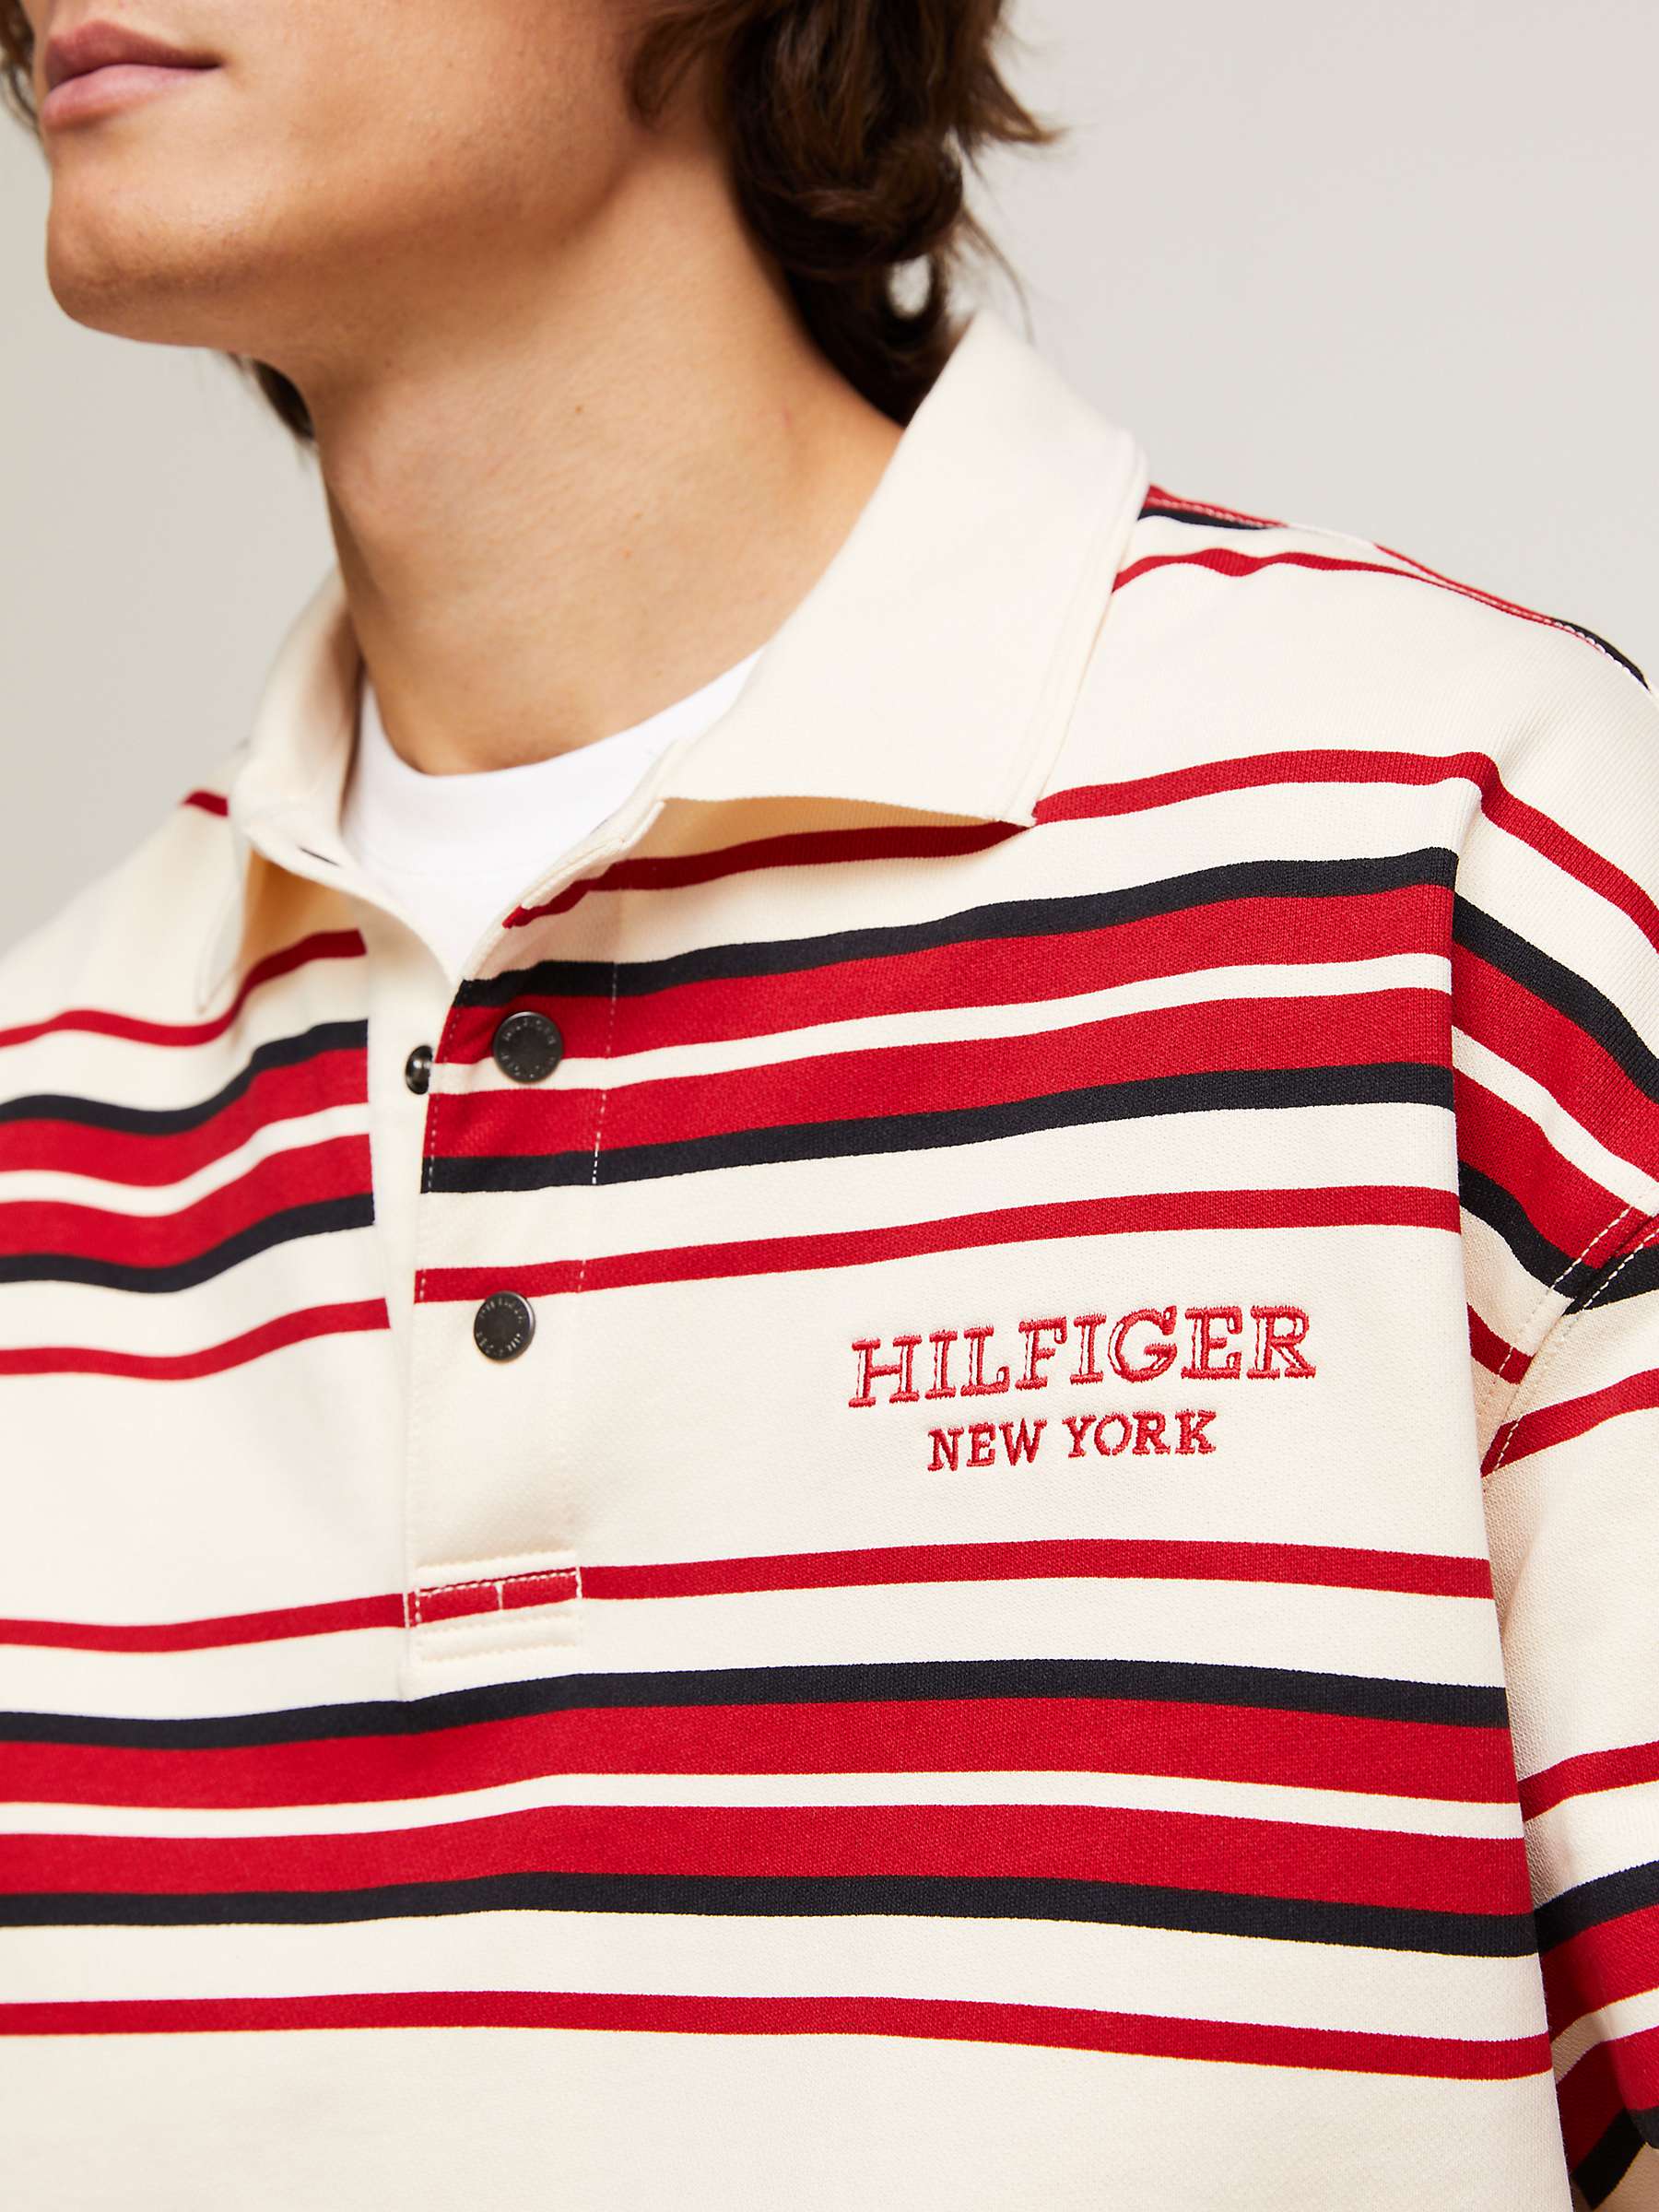 Buy Tommy Hilfiger Striped Rugby Top, Calico/Multi Online at johnlewis.com